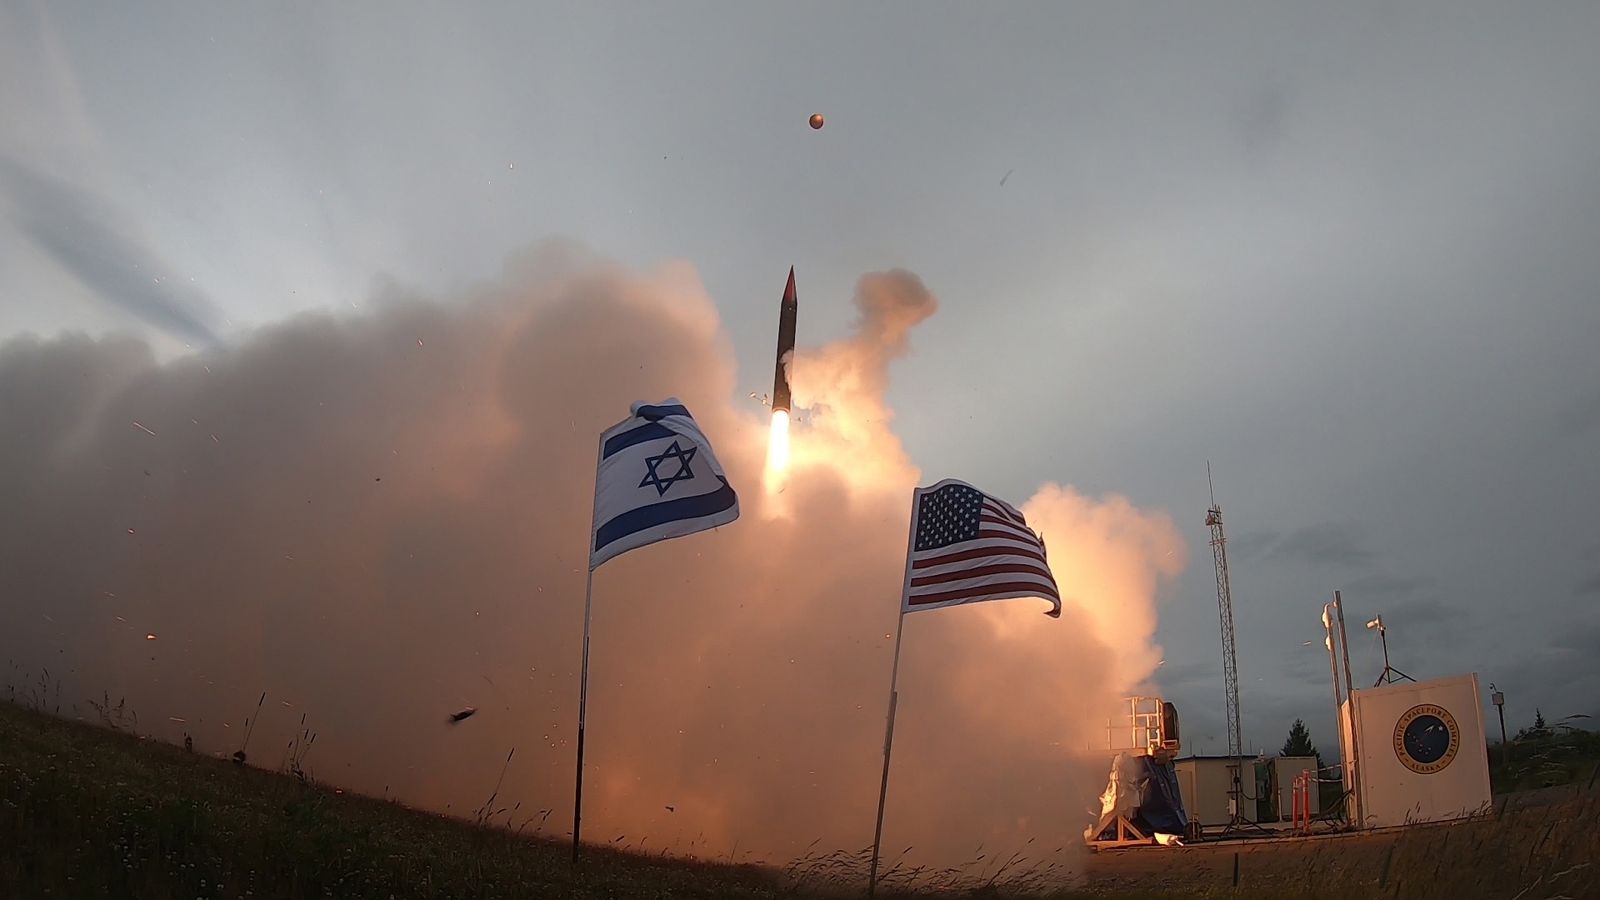 (FILES) A handout picture released by the Israeli Ministry of Defence on July 28, 2019 shows the launch of the Arrow-3 hypersonic anti-ballistic missile at an undisclosed location in Alaska. The Arrow 3 system -- designed to shoot down ballistic missiles above the Earth's atmosphere -- is jointly developed and produced by Israel and the United States. (Photo by Israeli Ministry of Defence / AFP) / == RESTRICTED TO EDITORIAL USE - MANDATORY CREDIT 'AFP PHOTO / HO / ISRAELI MINISTRY OF DEFENCE' - NO MARKETING NO ADVERTISING CAMPAIGNS - DISTRIBUTED AS A SERVICE TO CLIENTS ==